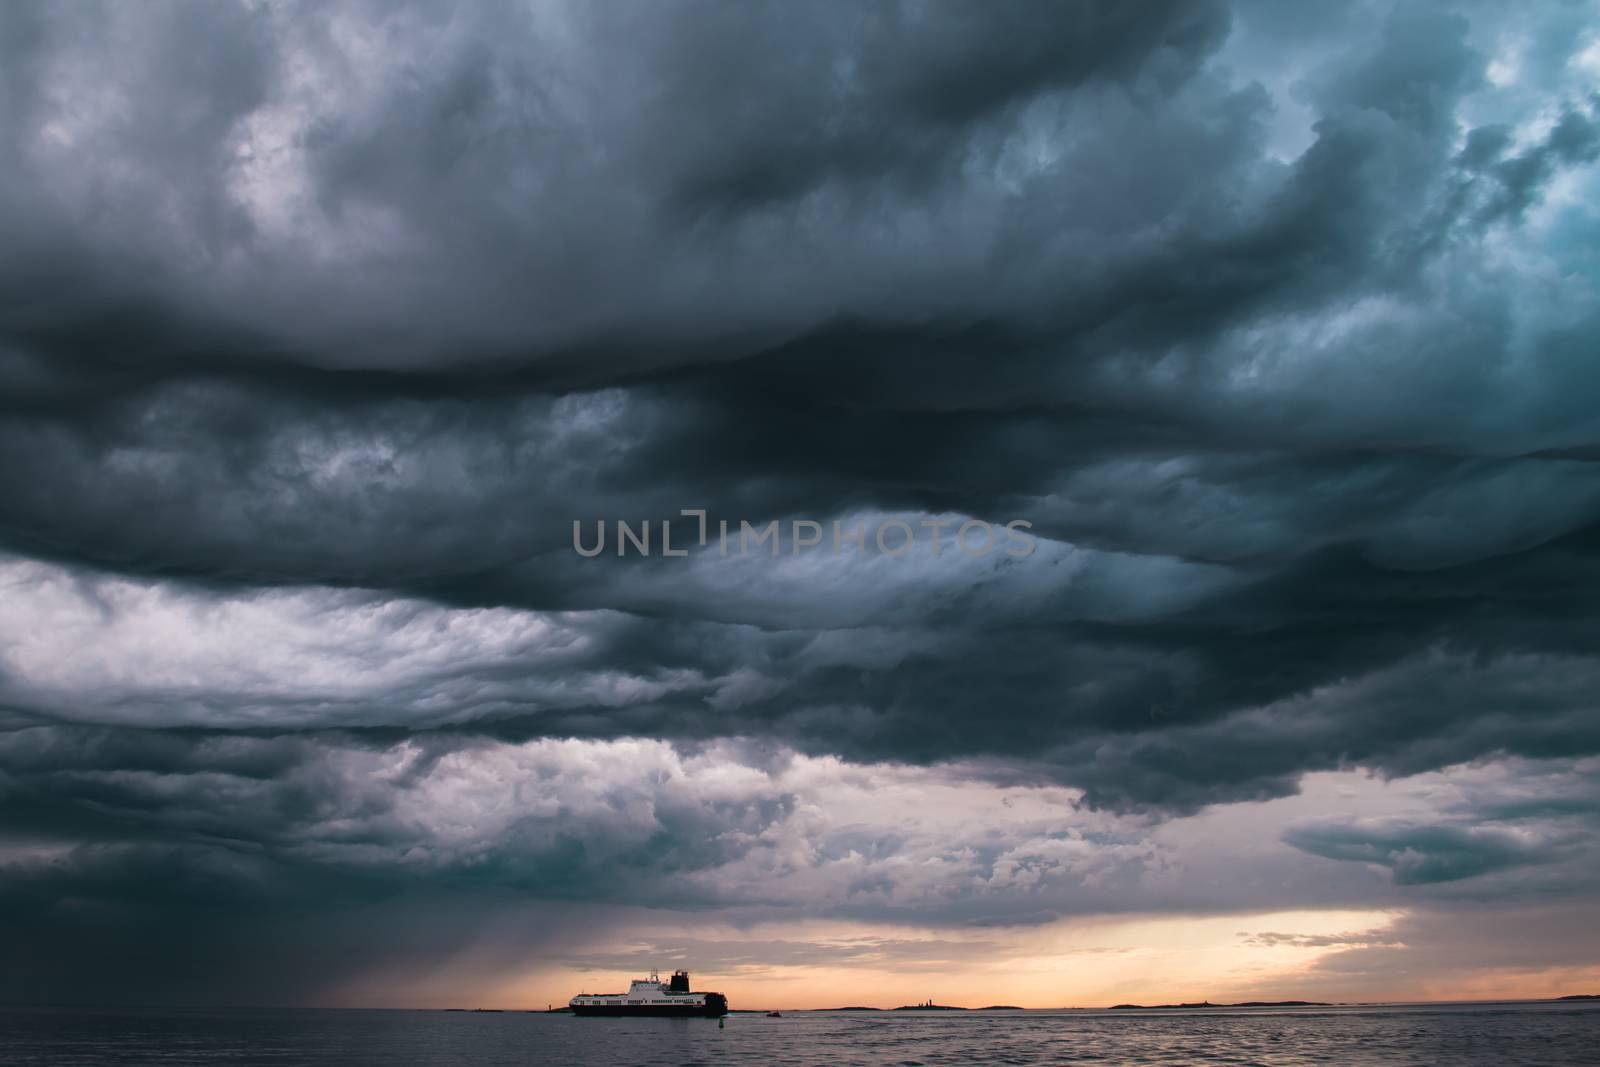 A cargo ship underneath stormy clouds by arvidnorberg